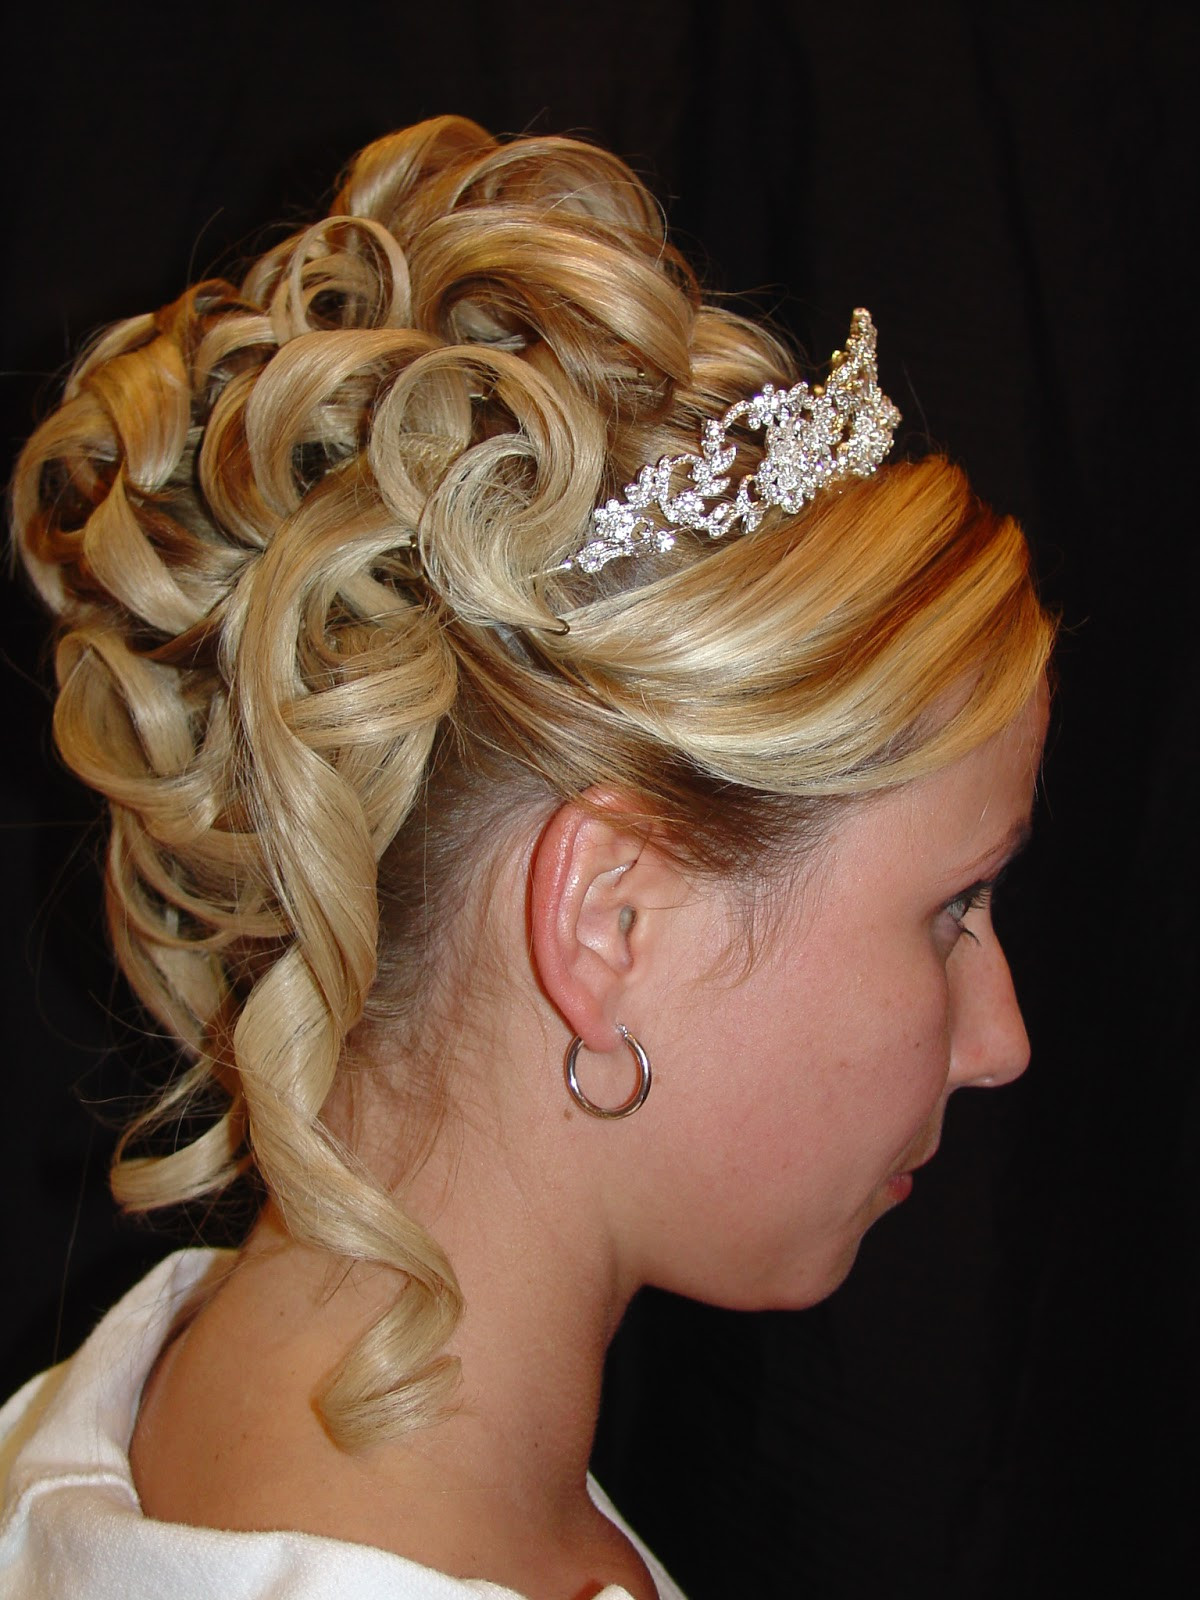 Bridesmaid Hairstyles Updo
 Style Dhoom Special Events UpDo Wedding Hairstyles